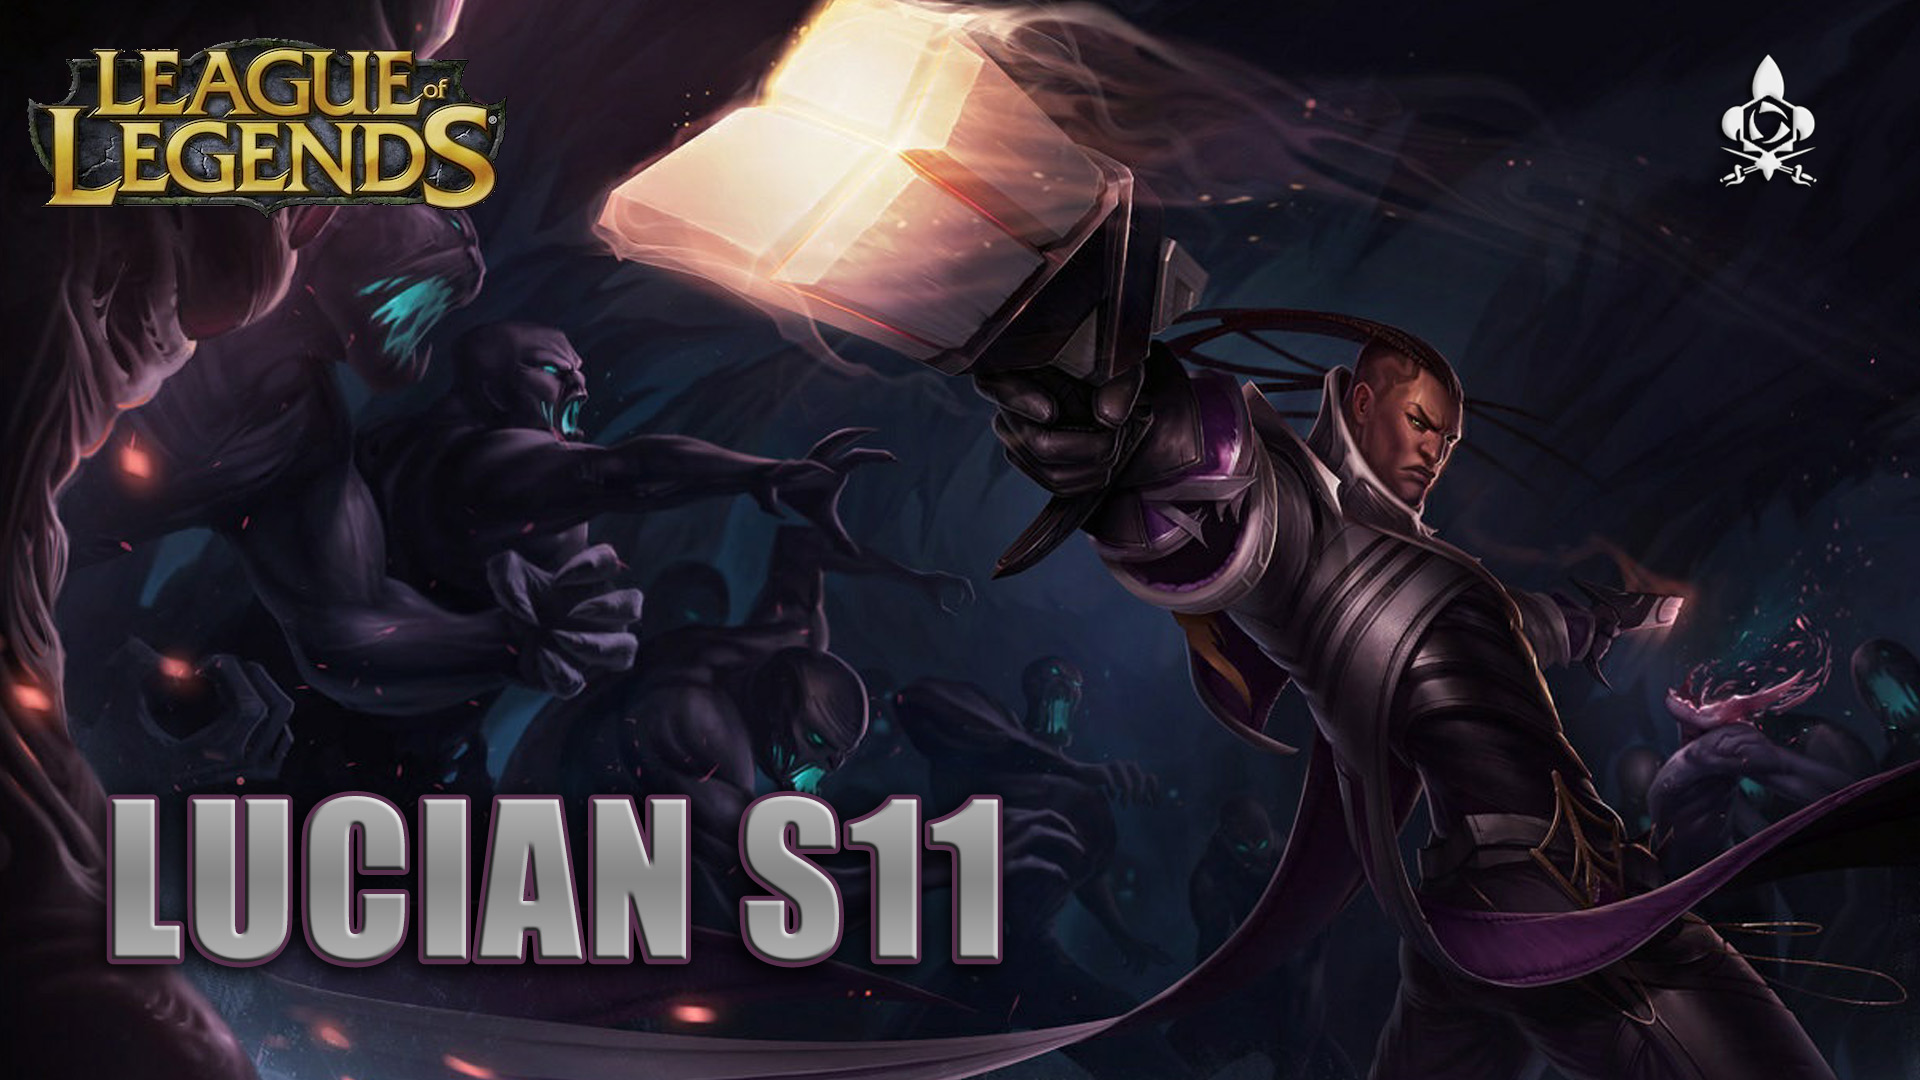 Lucian S11 guide on League of legends